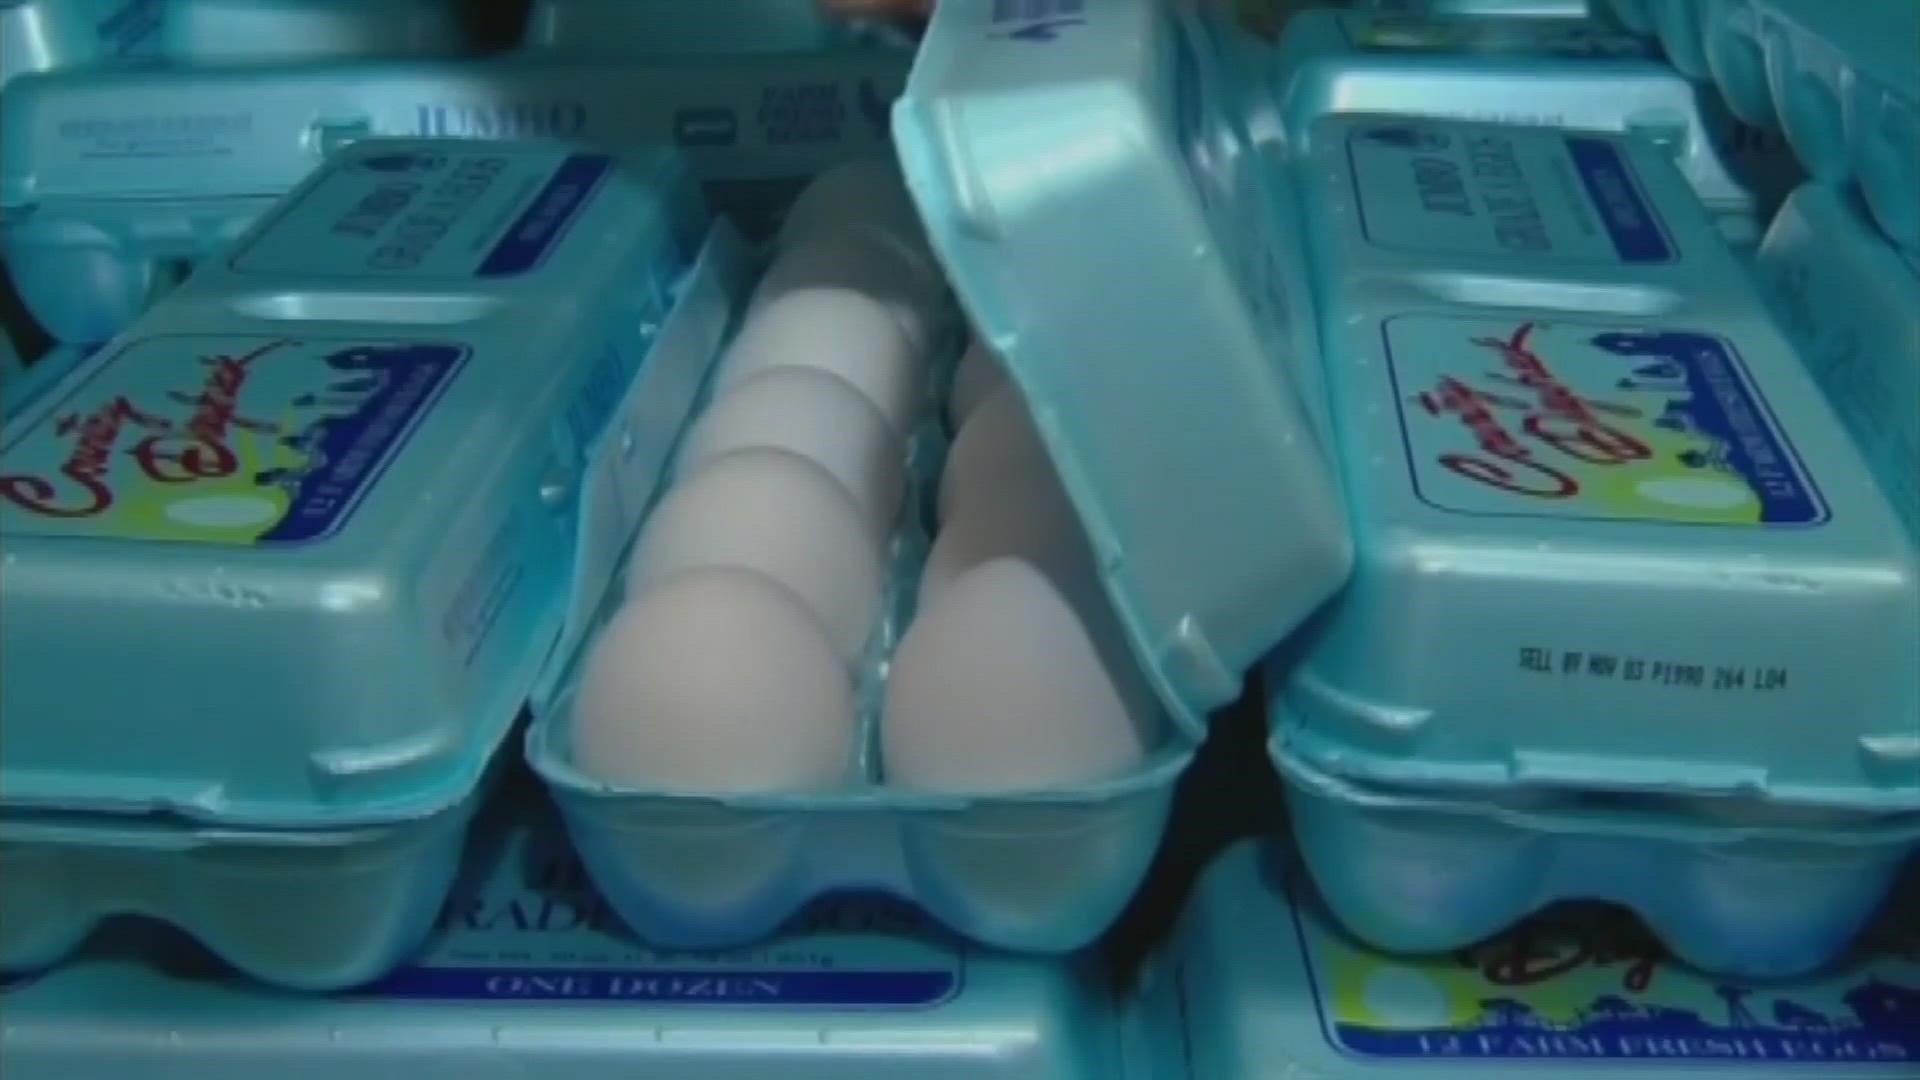 Attempts to smuggle eggs from Mexico are rising as prices rise at the grocery store, according to CBP.